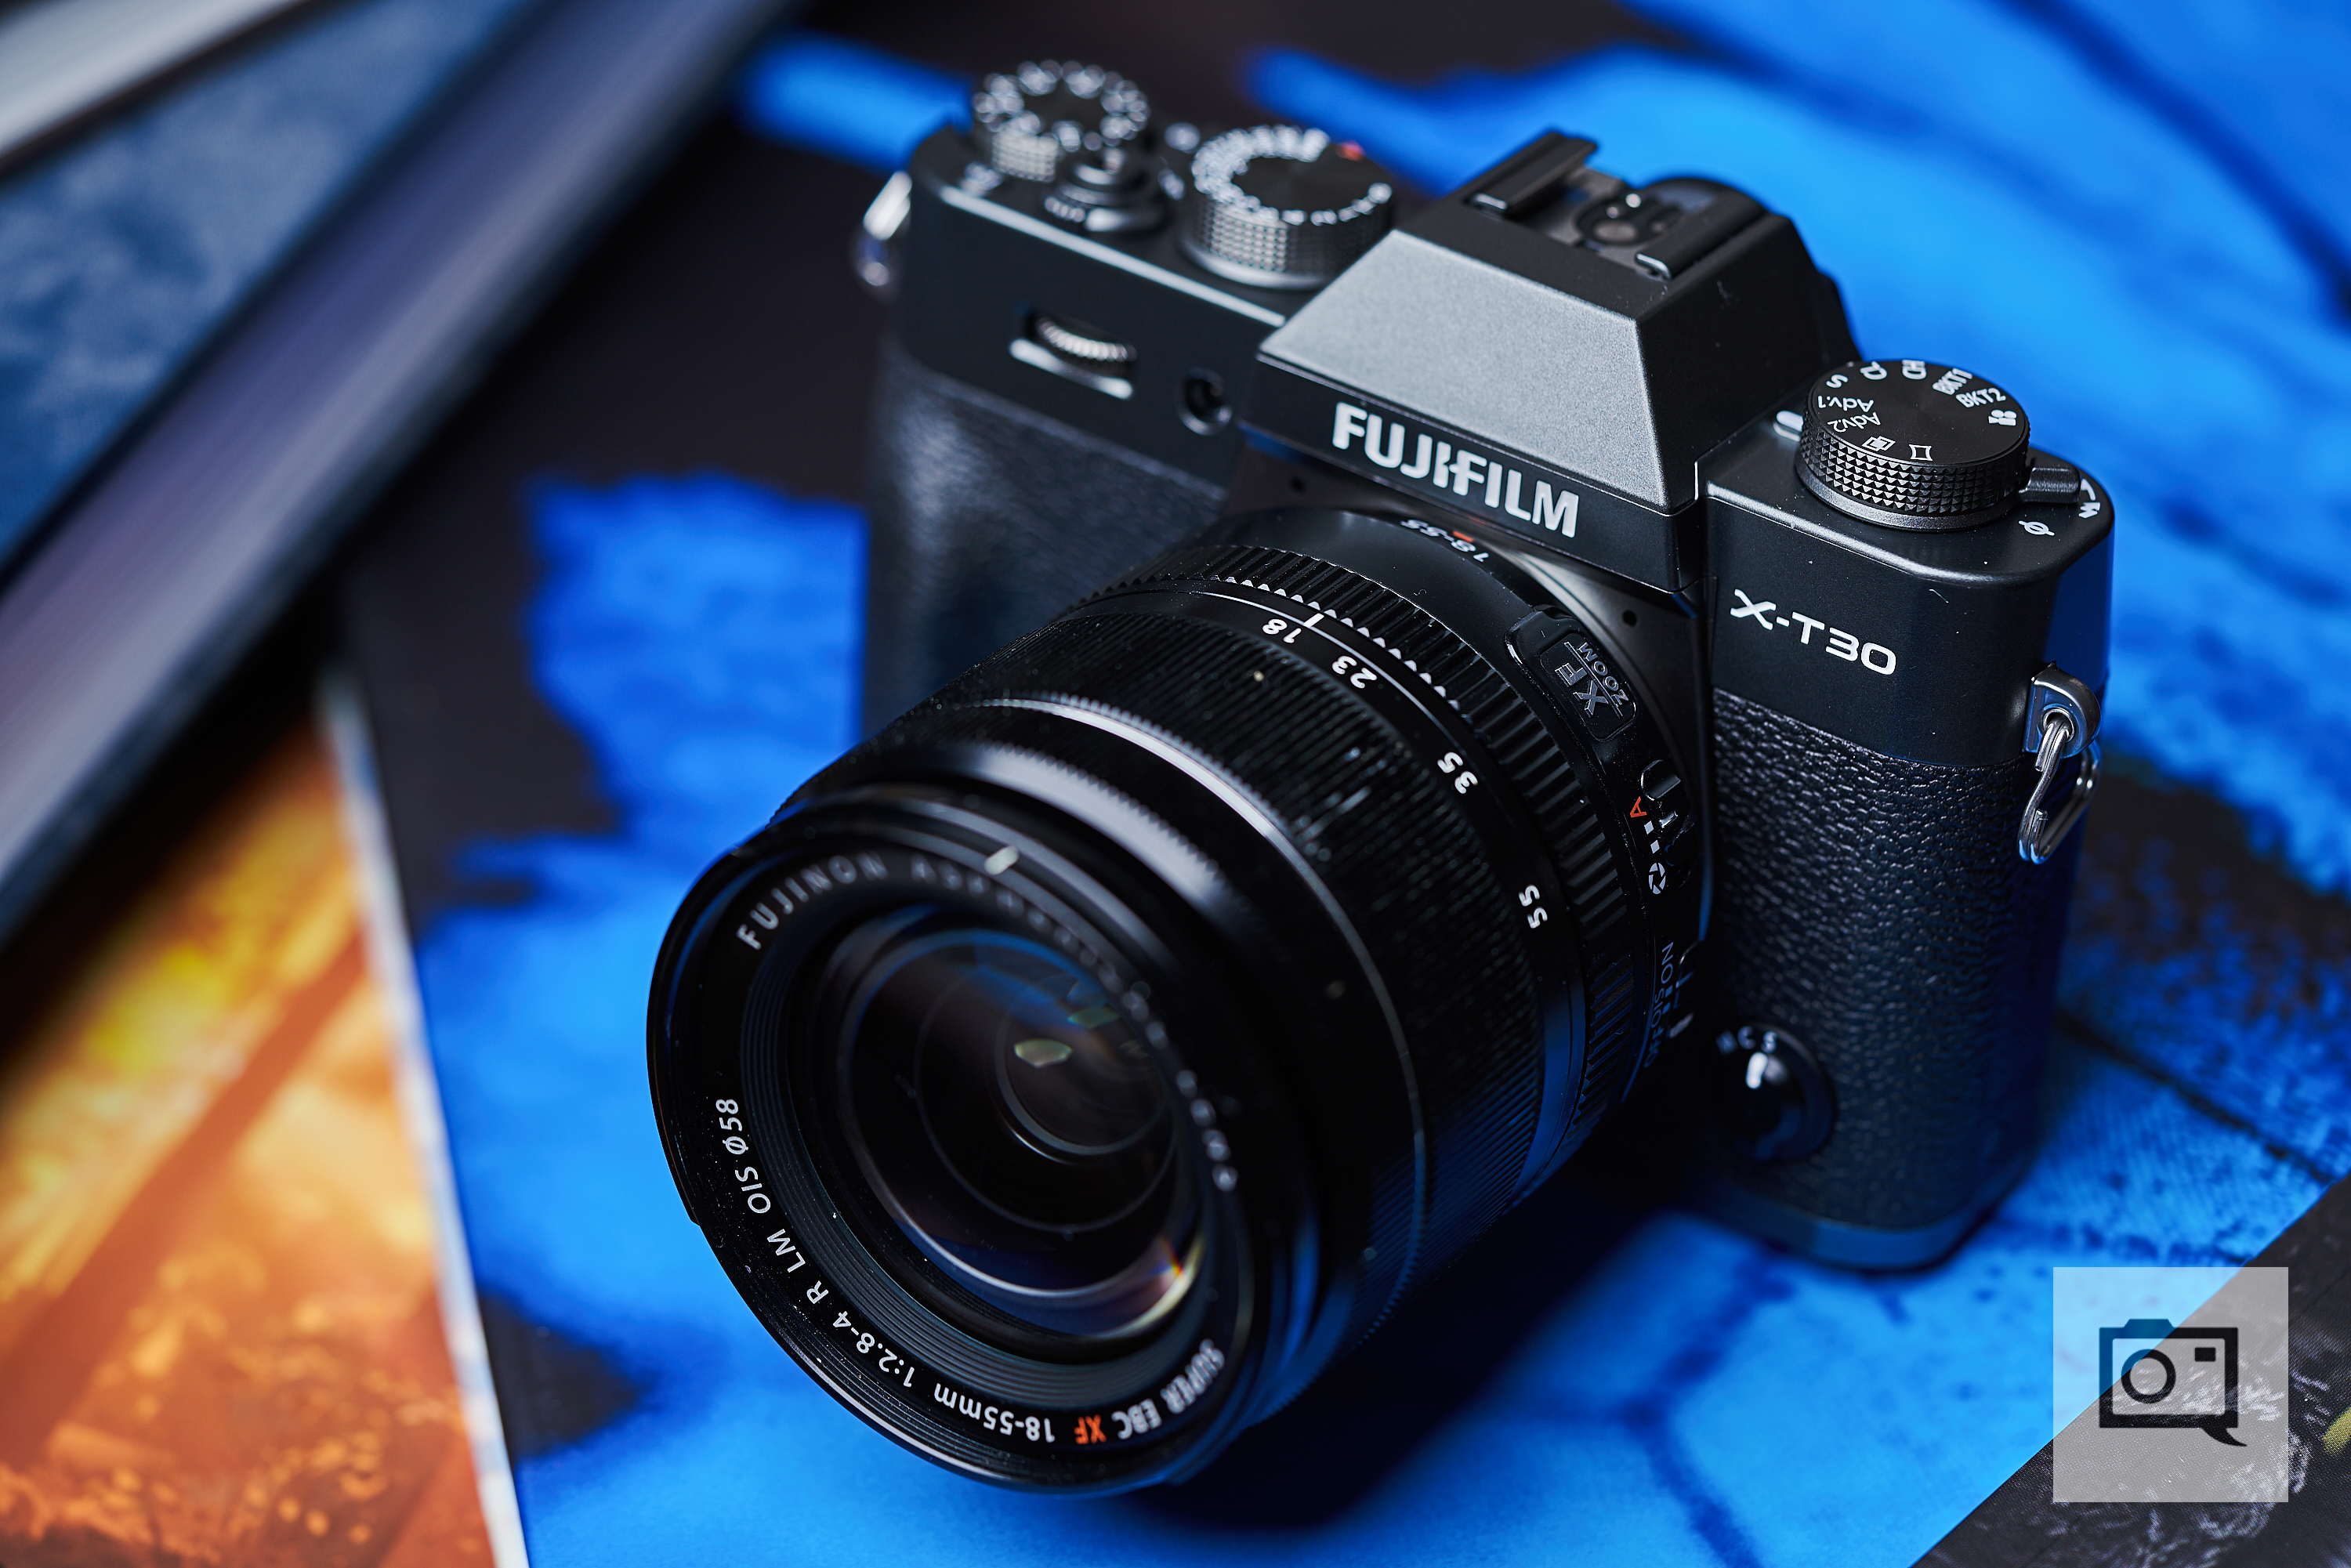 First Impressions: Fujifilm X-T30 (Look What They Did to the JoyStick)